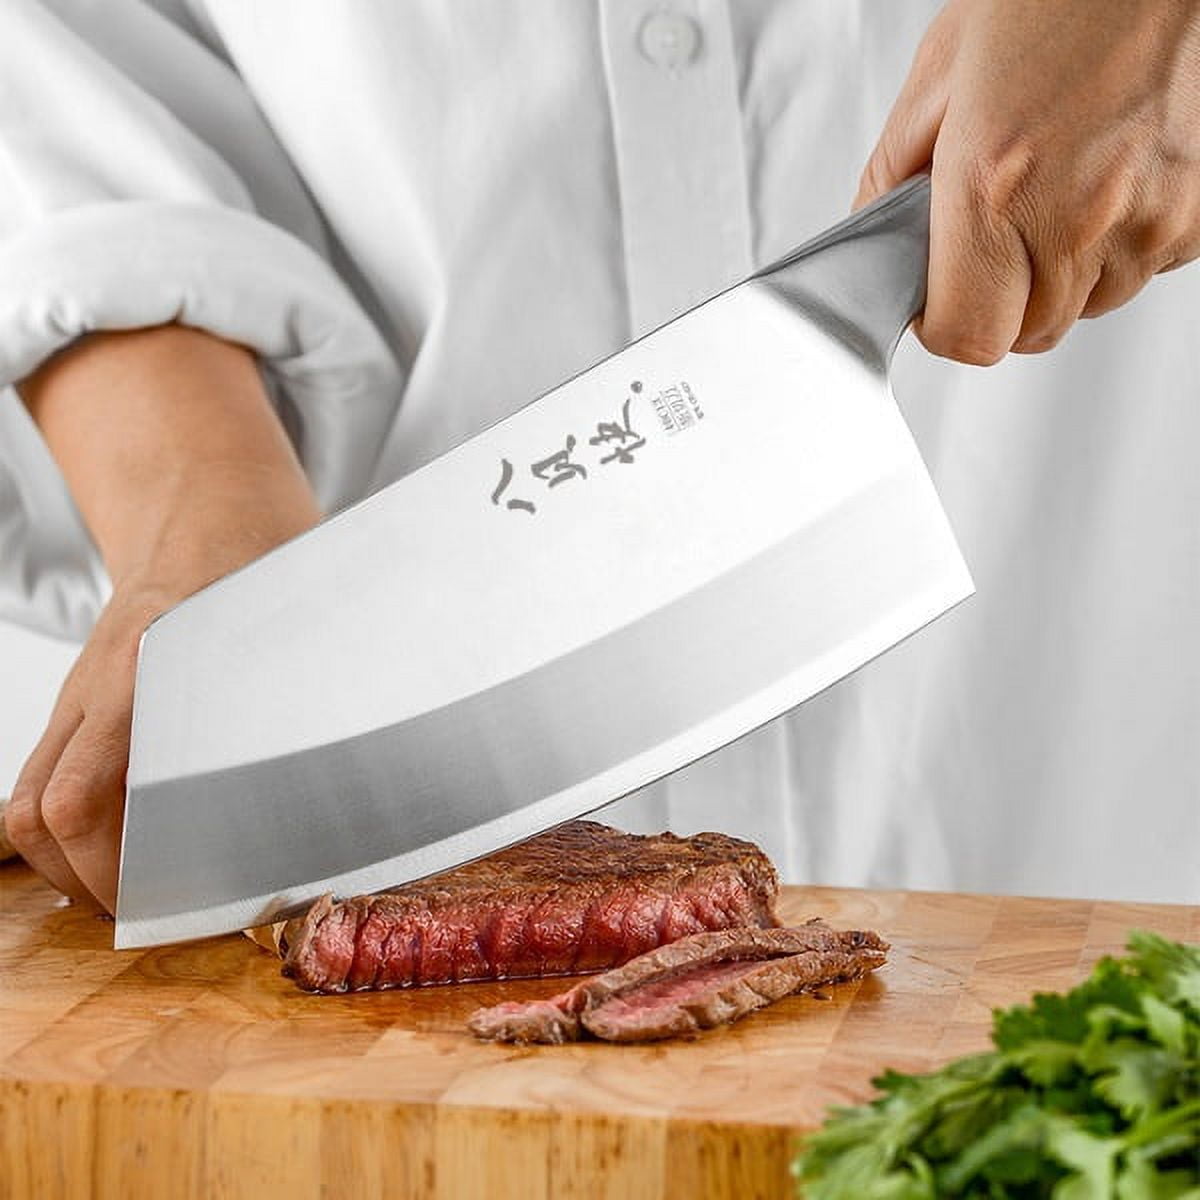 MYVIT 5CR15 Chef Knife 7 inch Chinese Kitchen Knives Meat